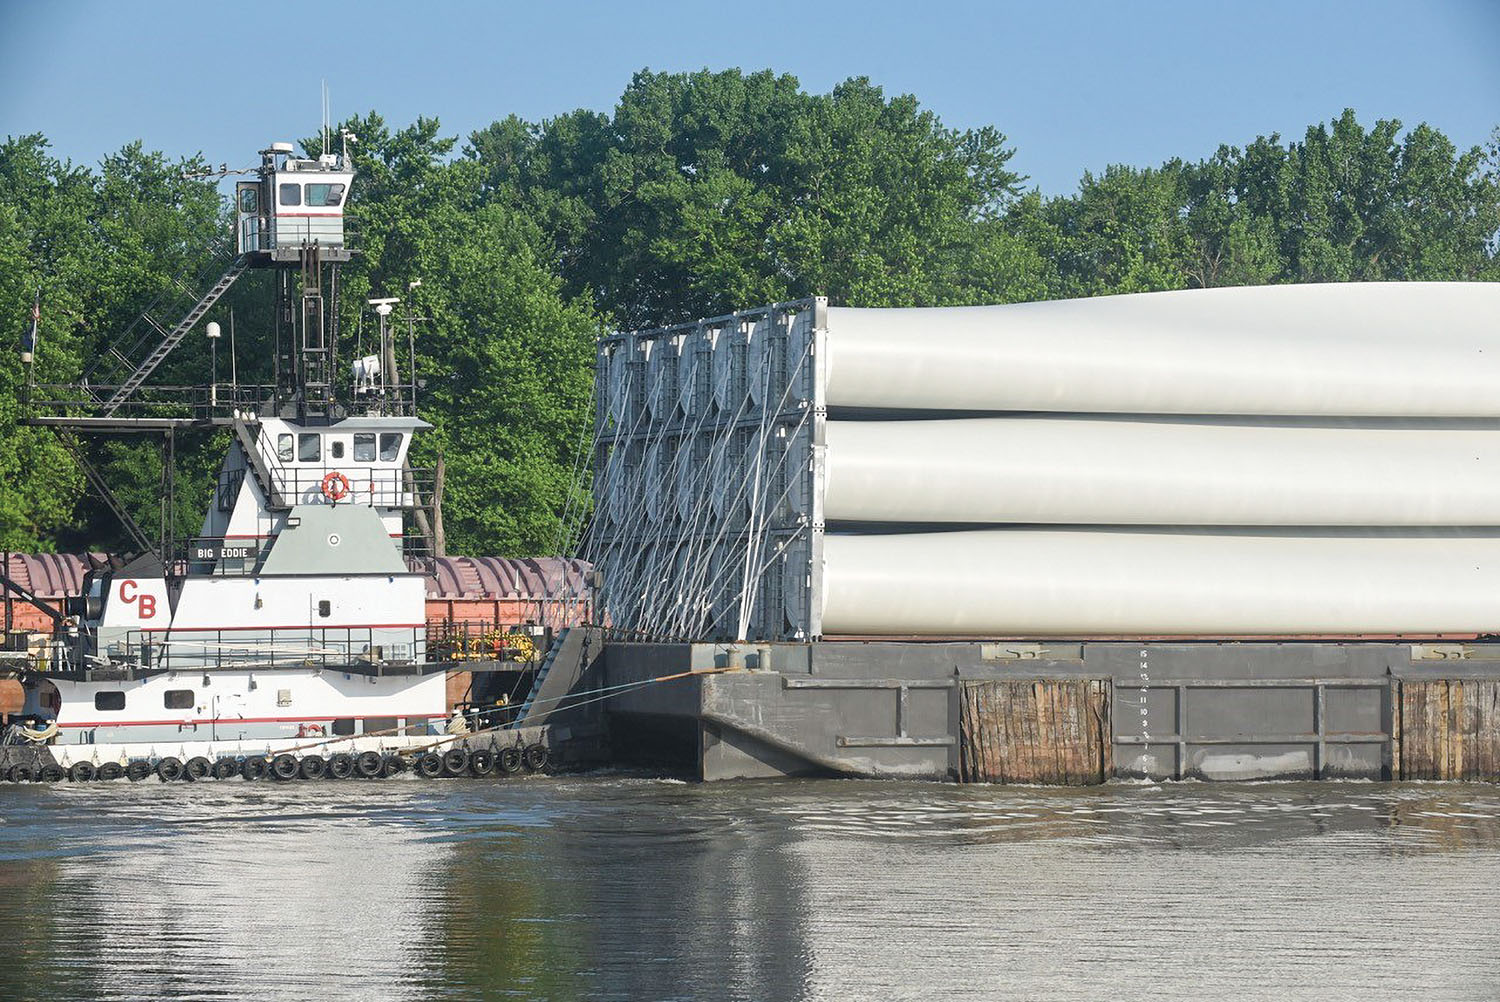 The mv. Big Eddie arrives with a barge loaded with wind turbine blades. (Photo by Bob Martin)